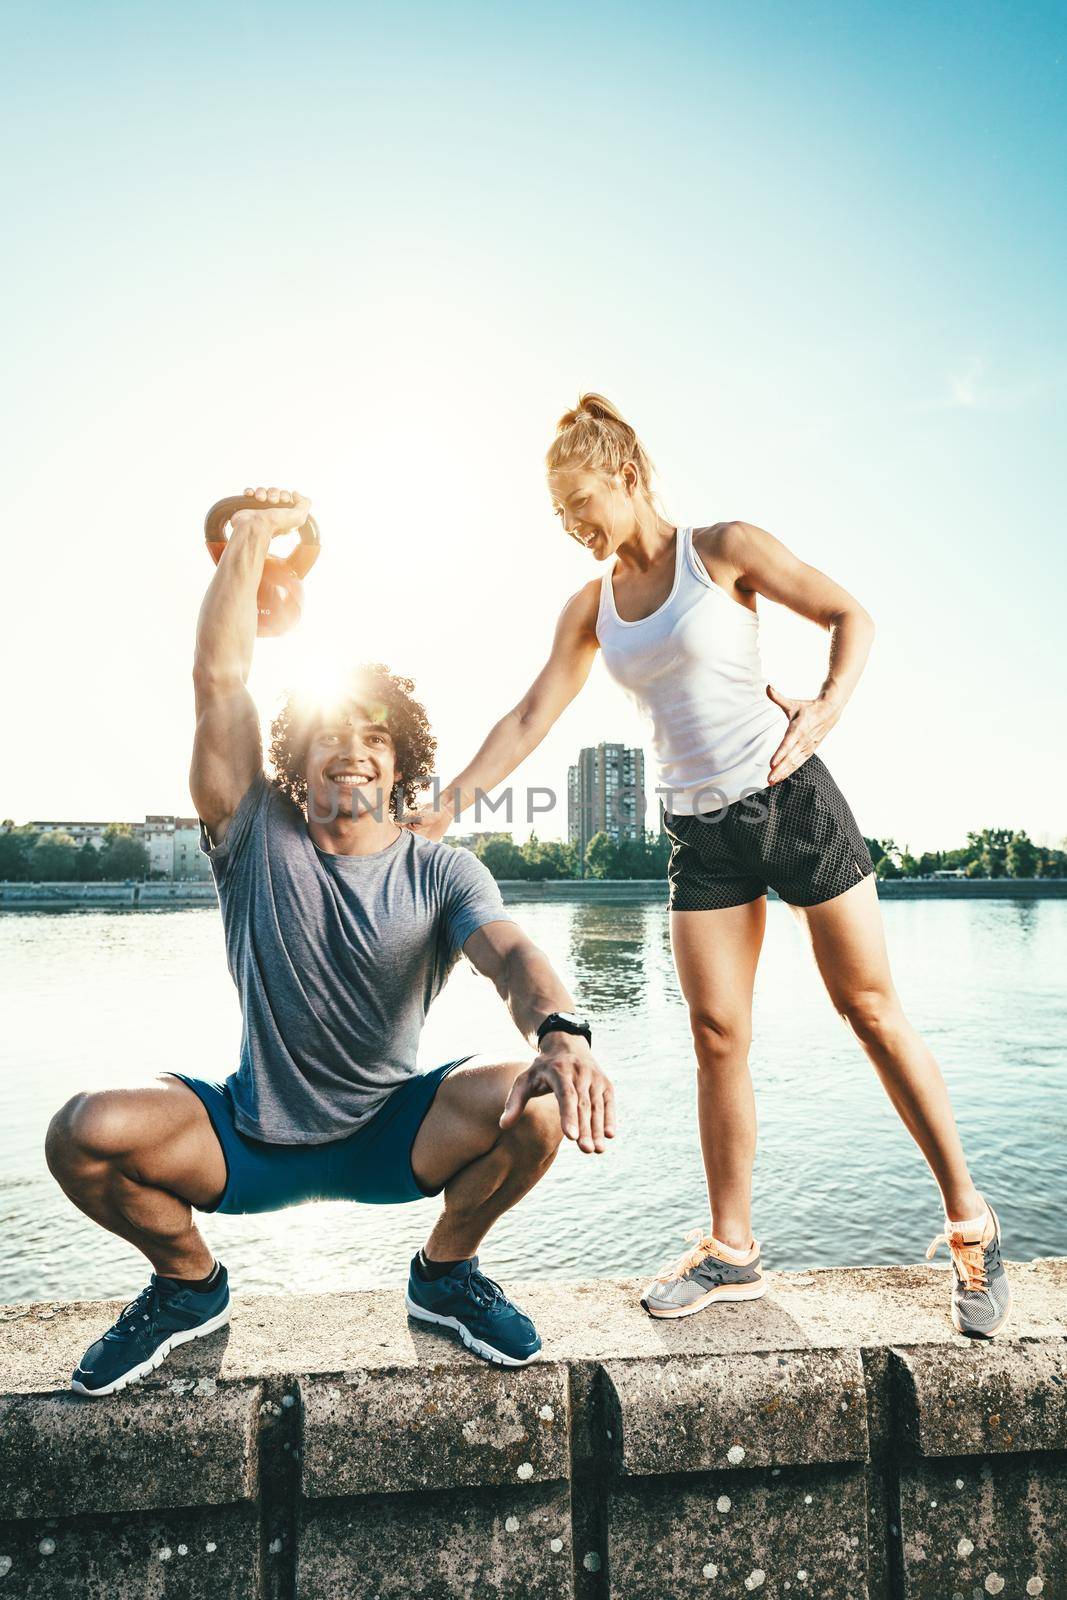 Young fitness couple is doing workout with kettlebell on the wall  by the river in a sunset. The man is crouching and holding kettlebell, and the woman supports him.